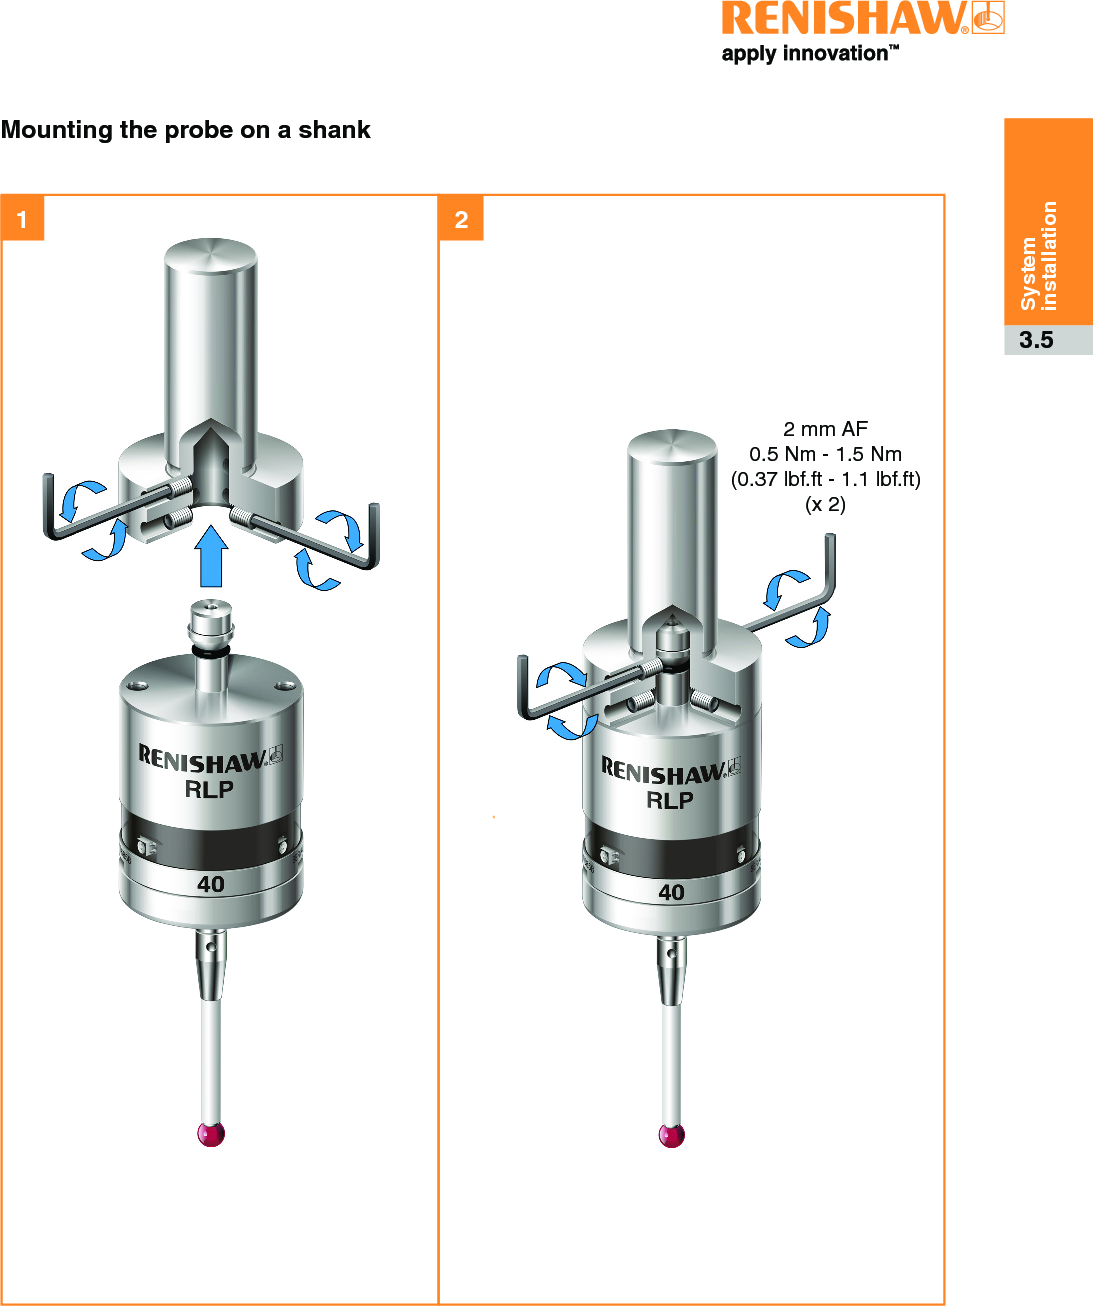 3.5System installationMounting the probe on a shank1 22 mm AF0.5 Nm - 1.5 Nm (0.37 lbf.ft - 1.1 lbf.ft)  (x 2)